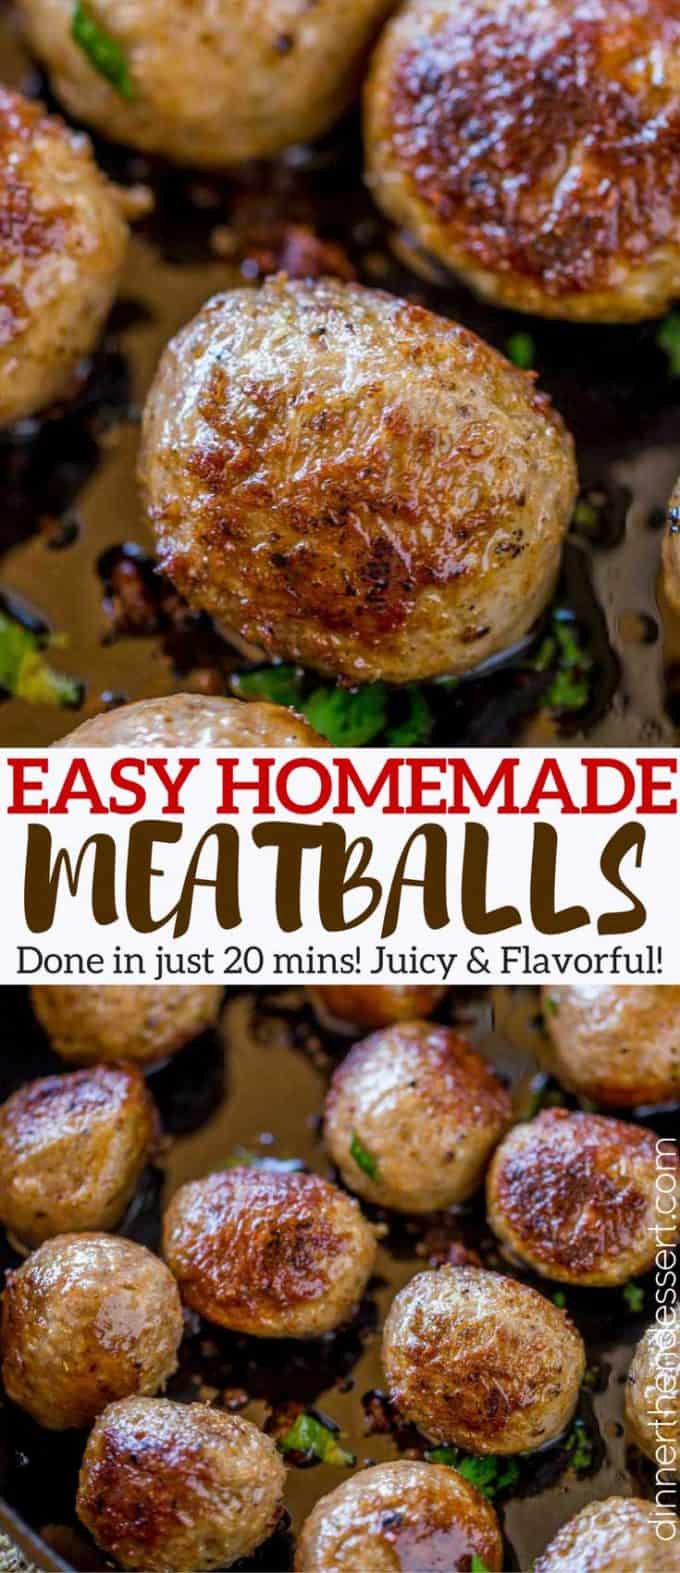 Easy Homemade Meatballs made in just 20 minutes that are moist, crispy on the outside and fluffy on the inside. Perfect for all your meatball recipes, and easy to freeze!